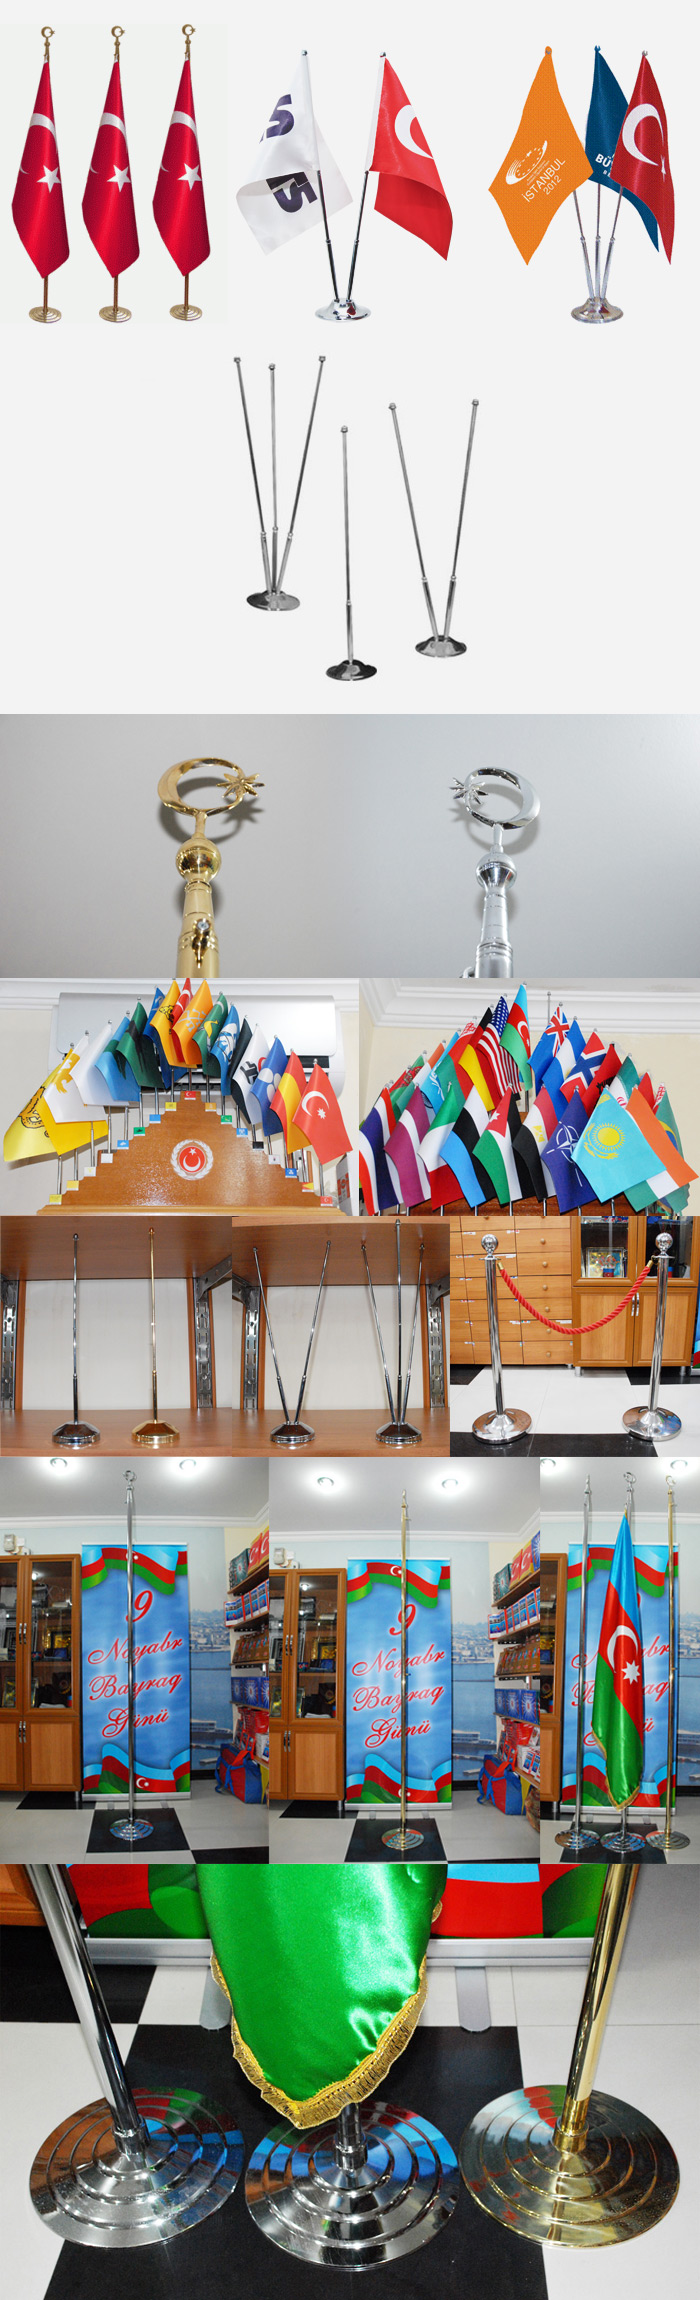 Table Over Flags and Poles